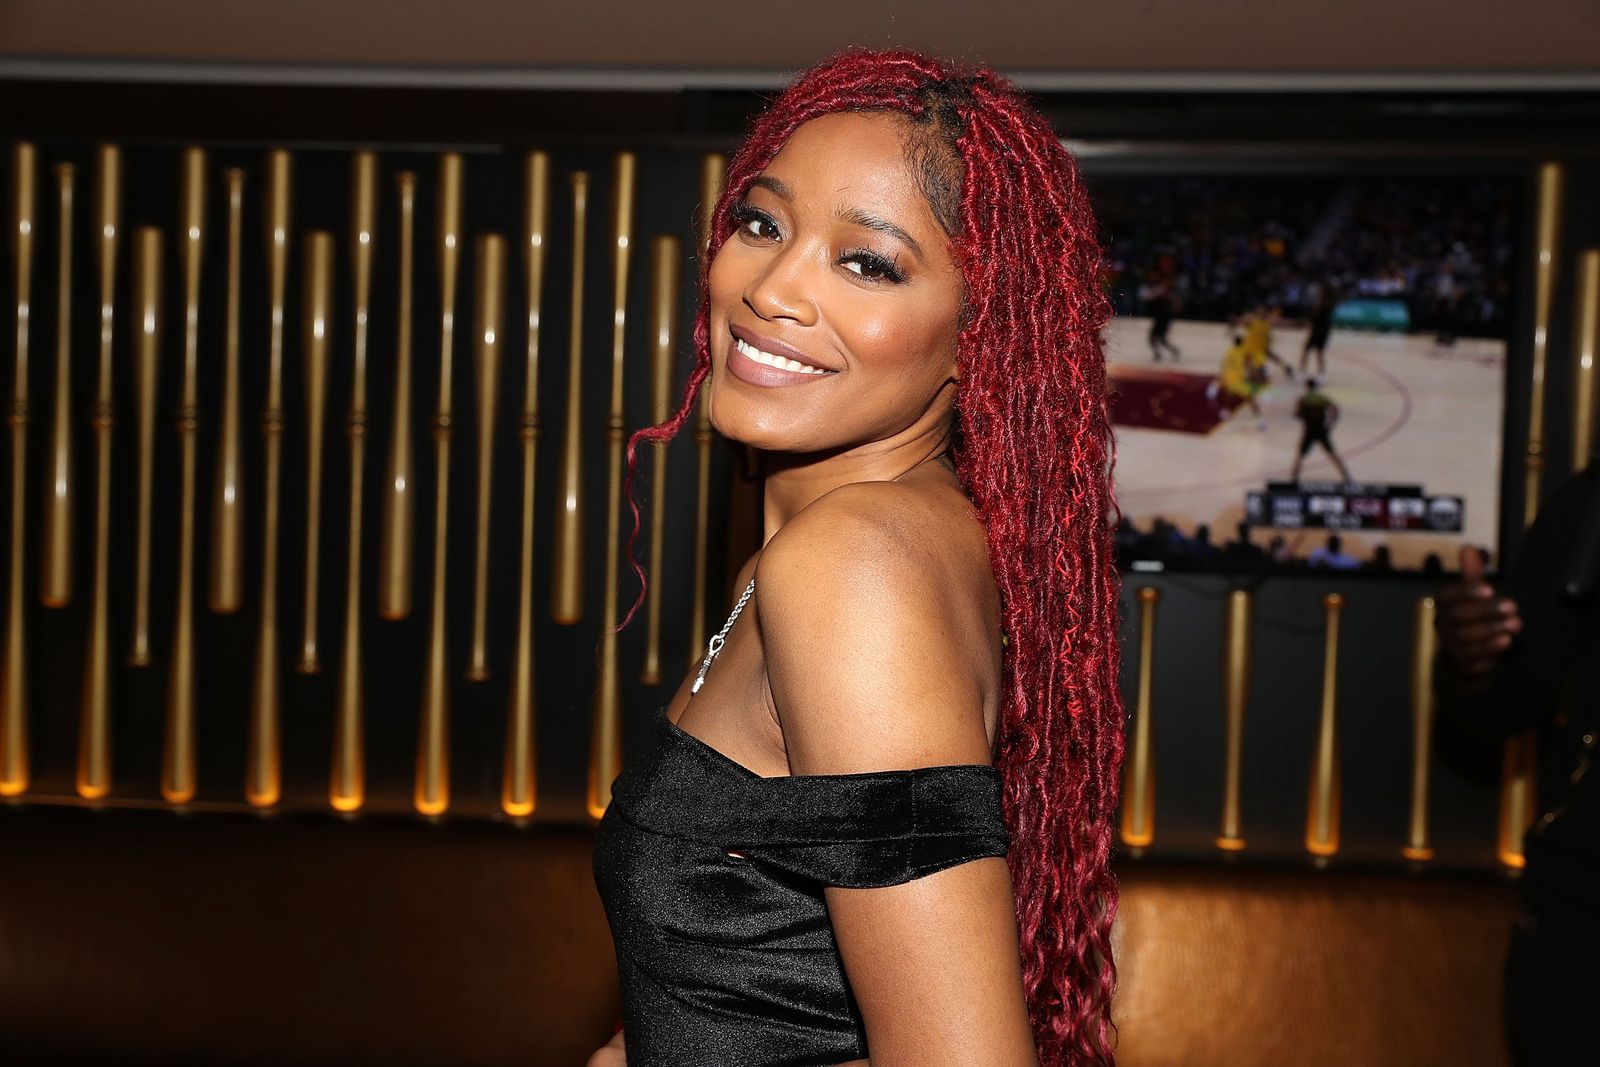 Singer and actress Keke Palmer at her listening party at the 40/40 club in 2018 | Photo: Getty Images